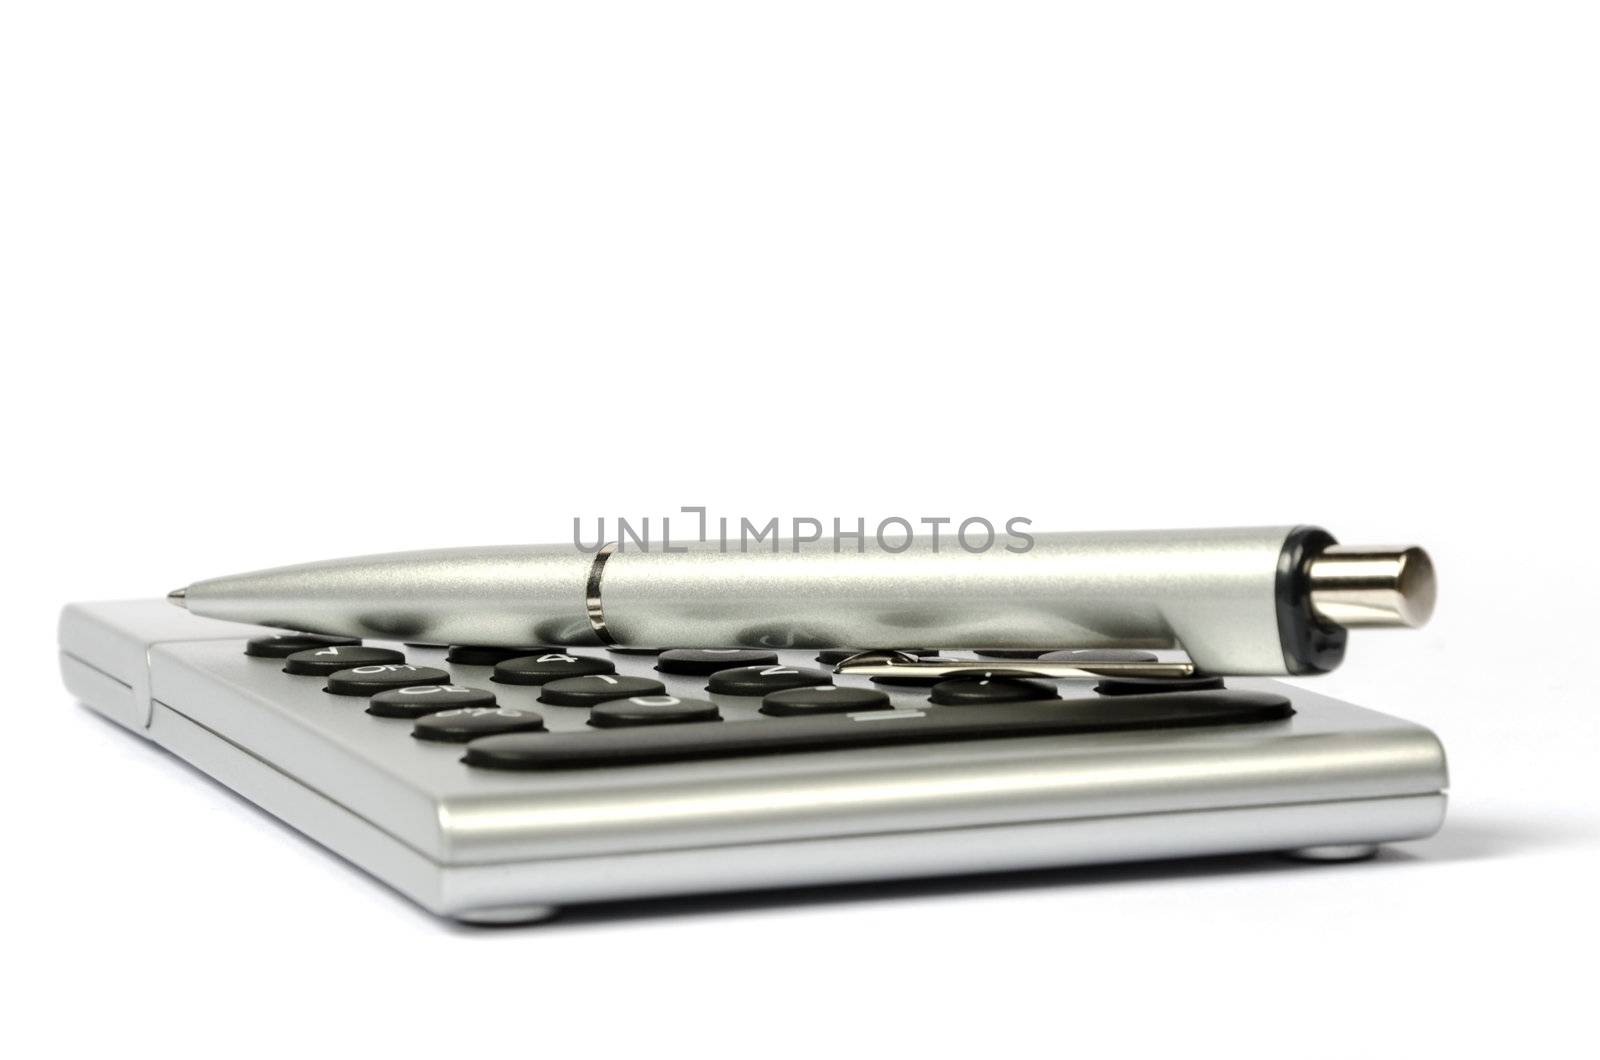 A side view of the calculator and a pen